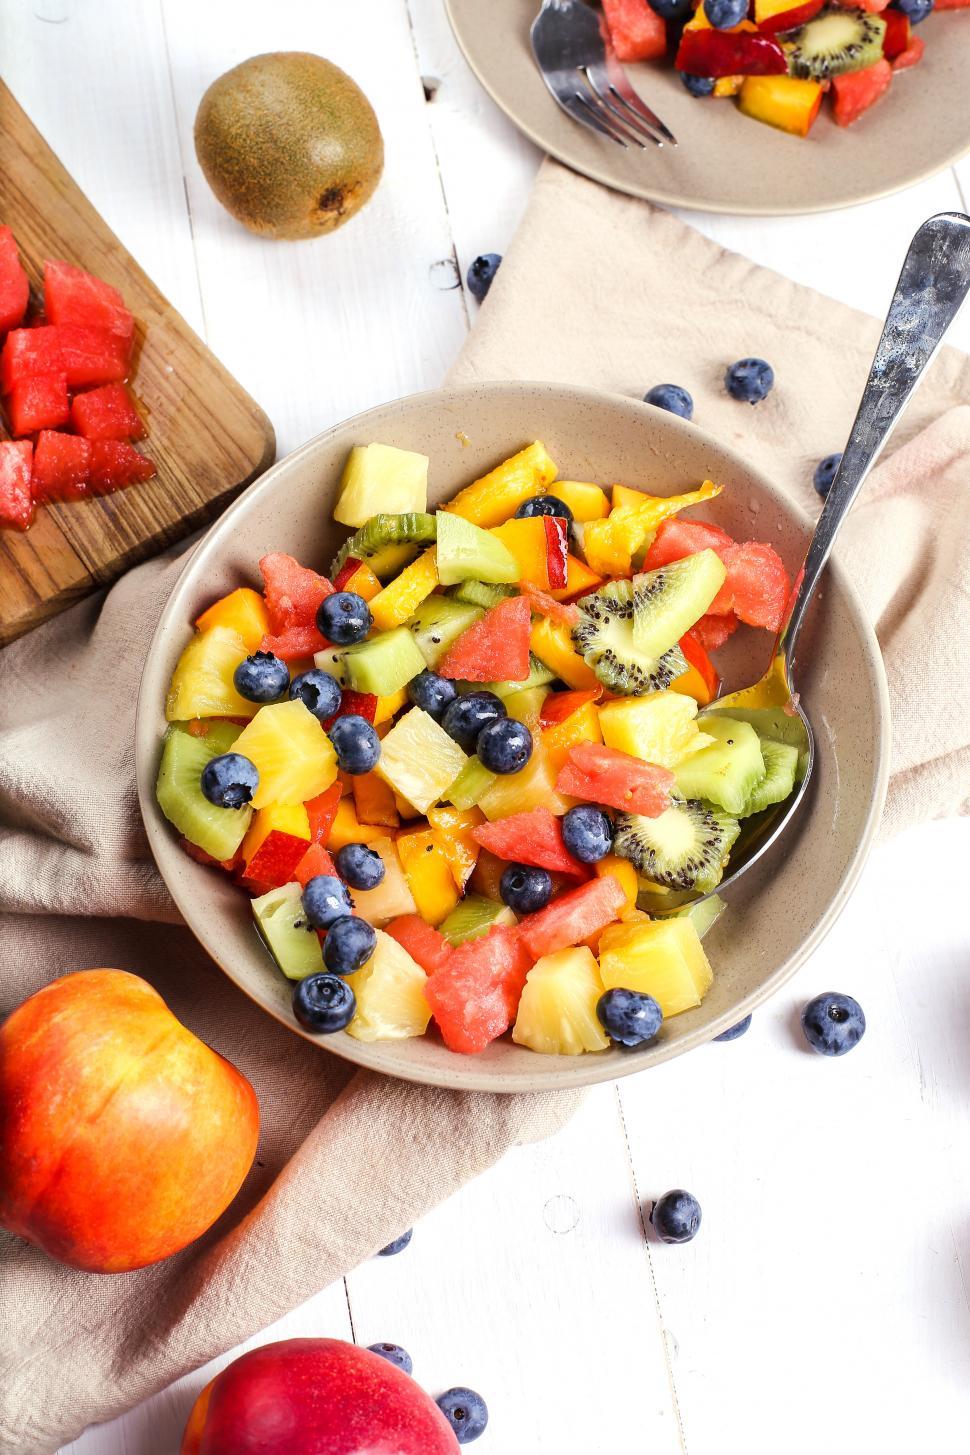 Free Image of Fruit salad and fruit on the table 